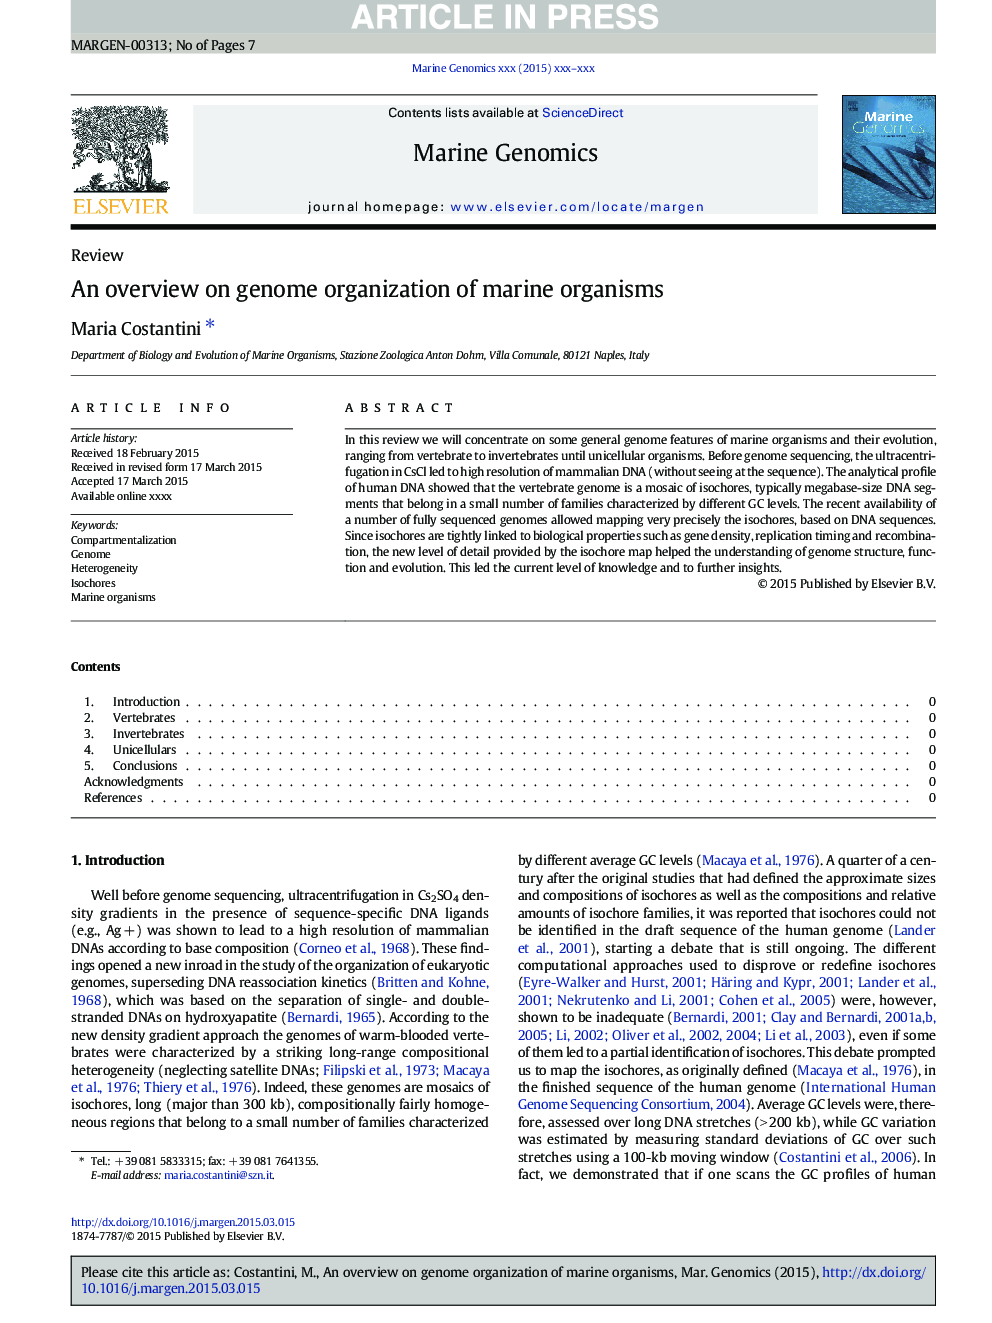 An overview on genome organization of marine organisms